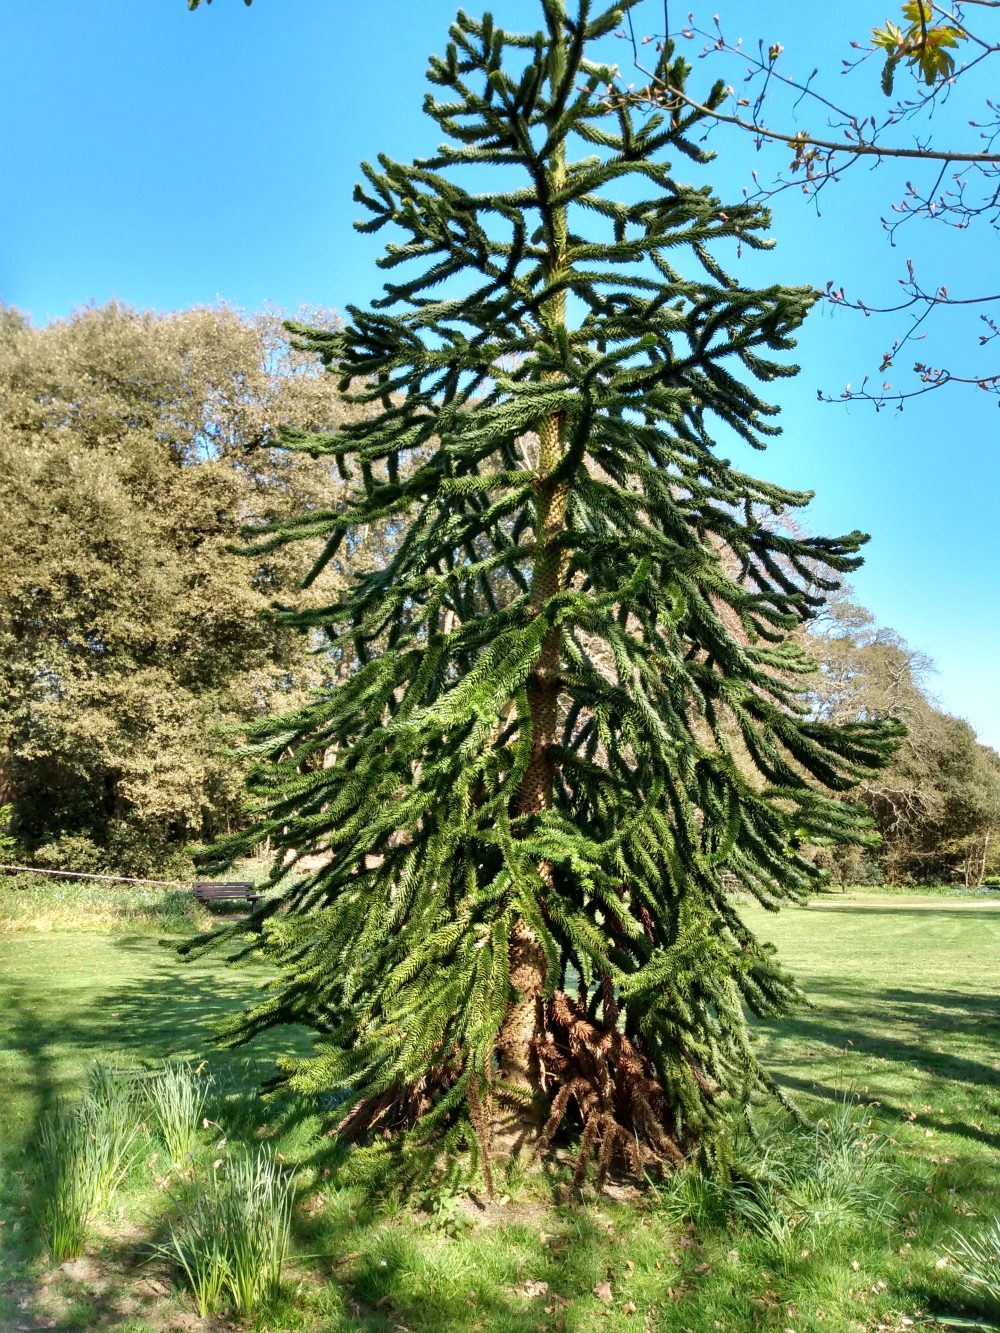 Monkey Puzzle Tree set in lawn with blue sky and trees in background